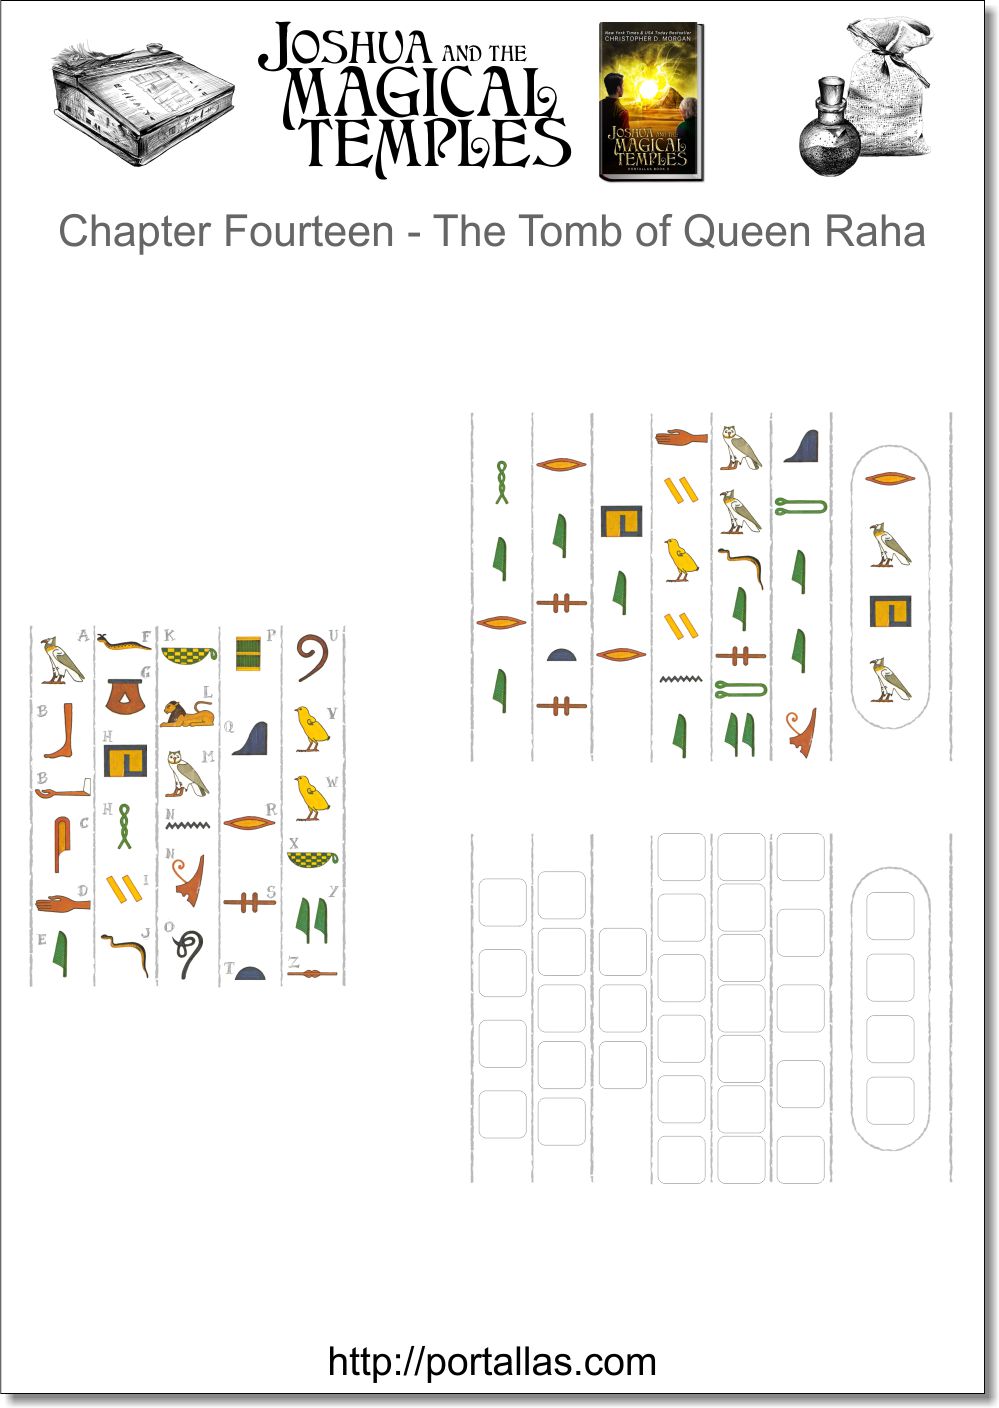 Chapter Fourteen - The Tomb of Queen Raha